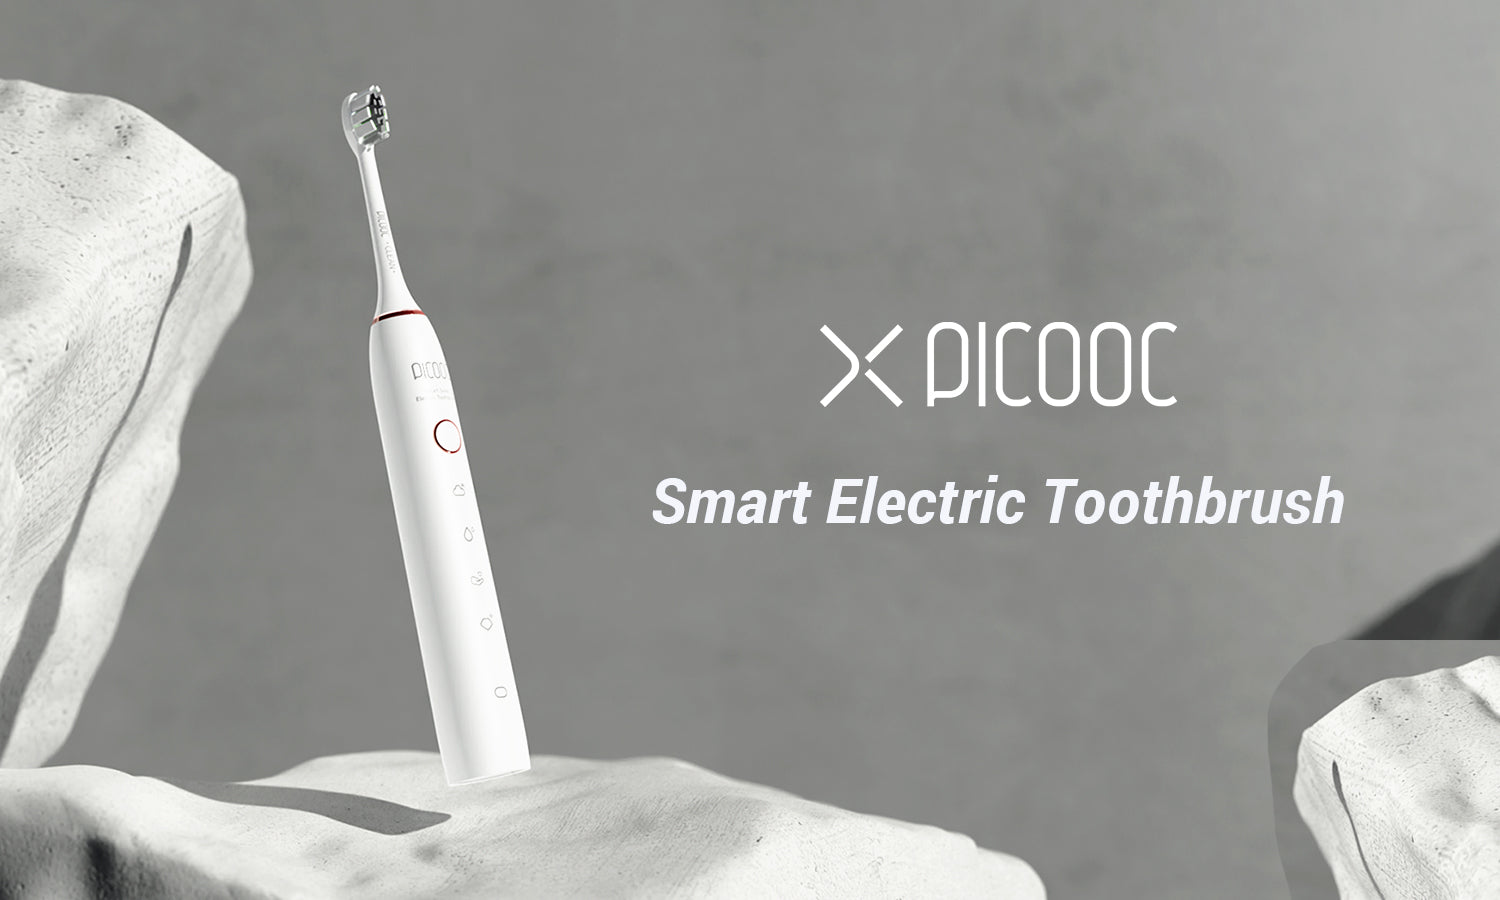 PICOOC-Introduces-Next-Generation-Smart-Toothbrush-for-Customized-Oral-Care PICOOC